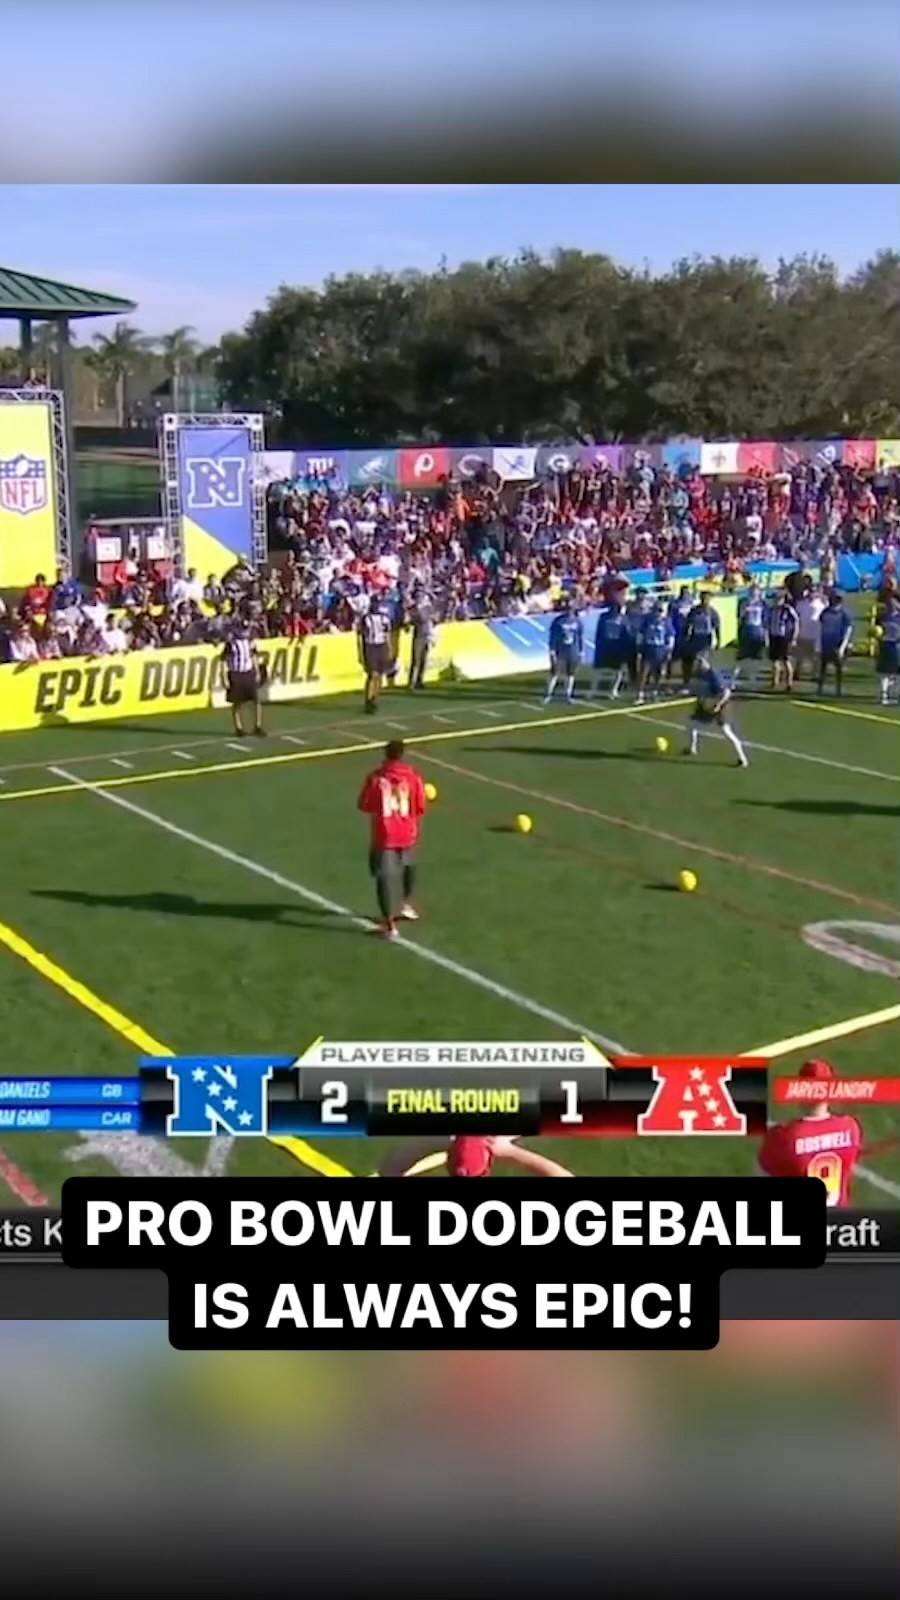 Can’t wait for dodgeball this year at #ProBowlSkills  : Pro Bowl Skills Showdow...